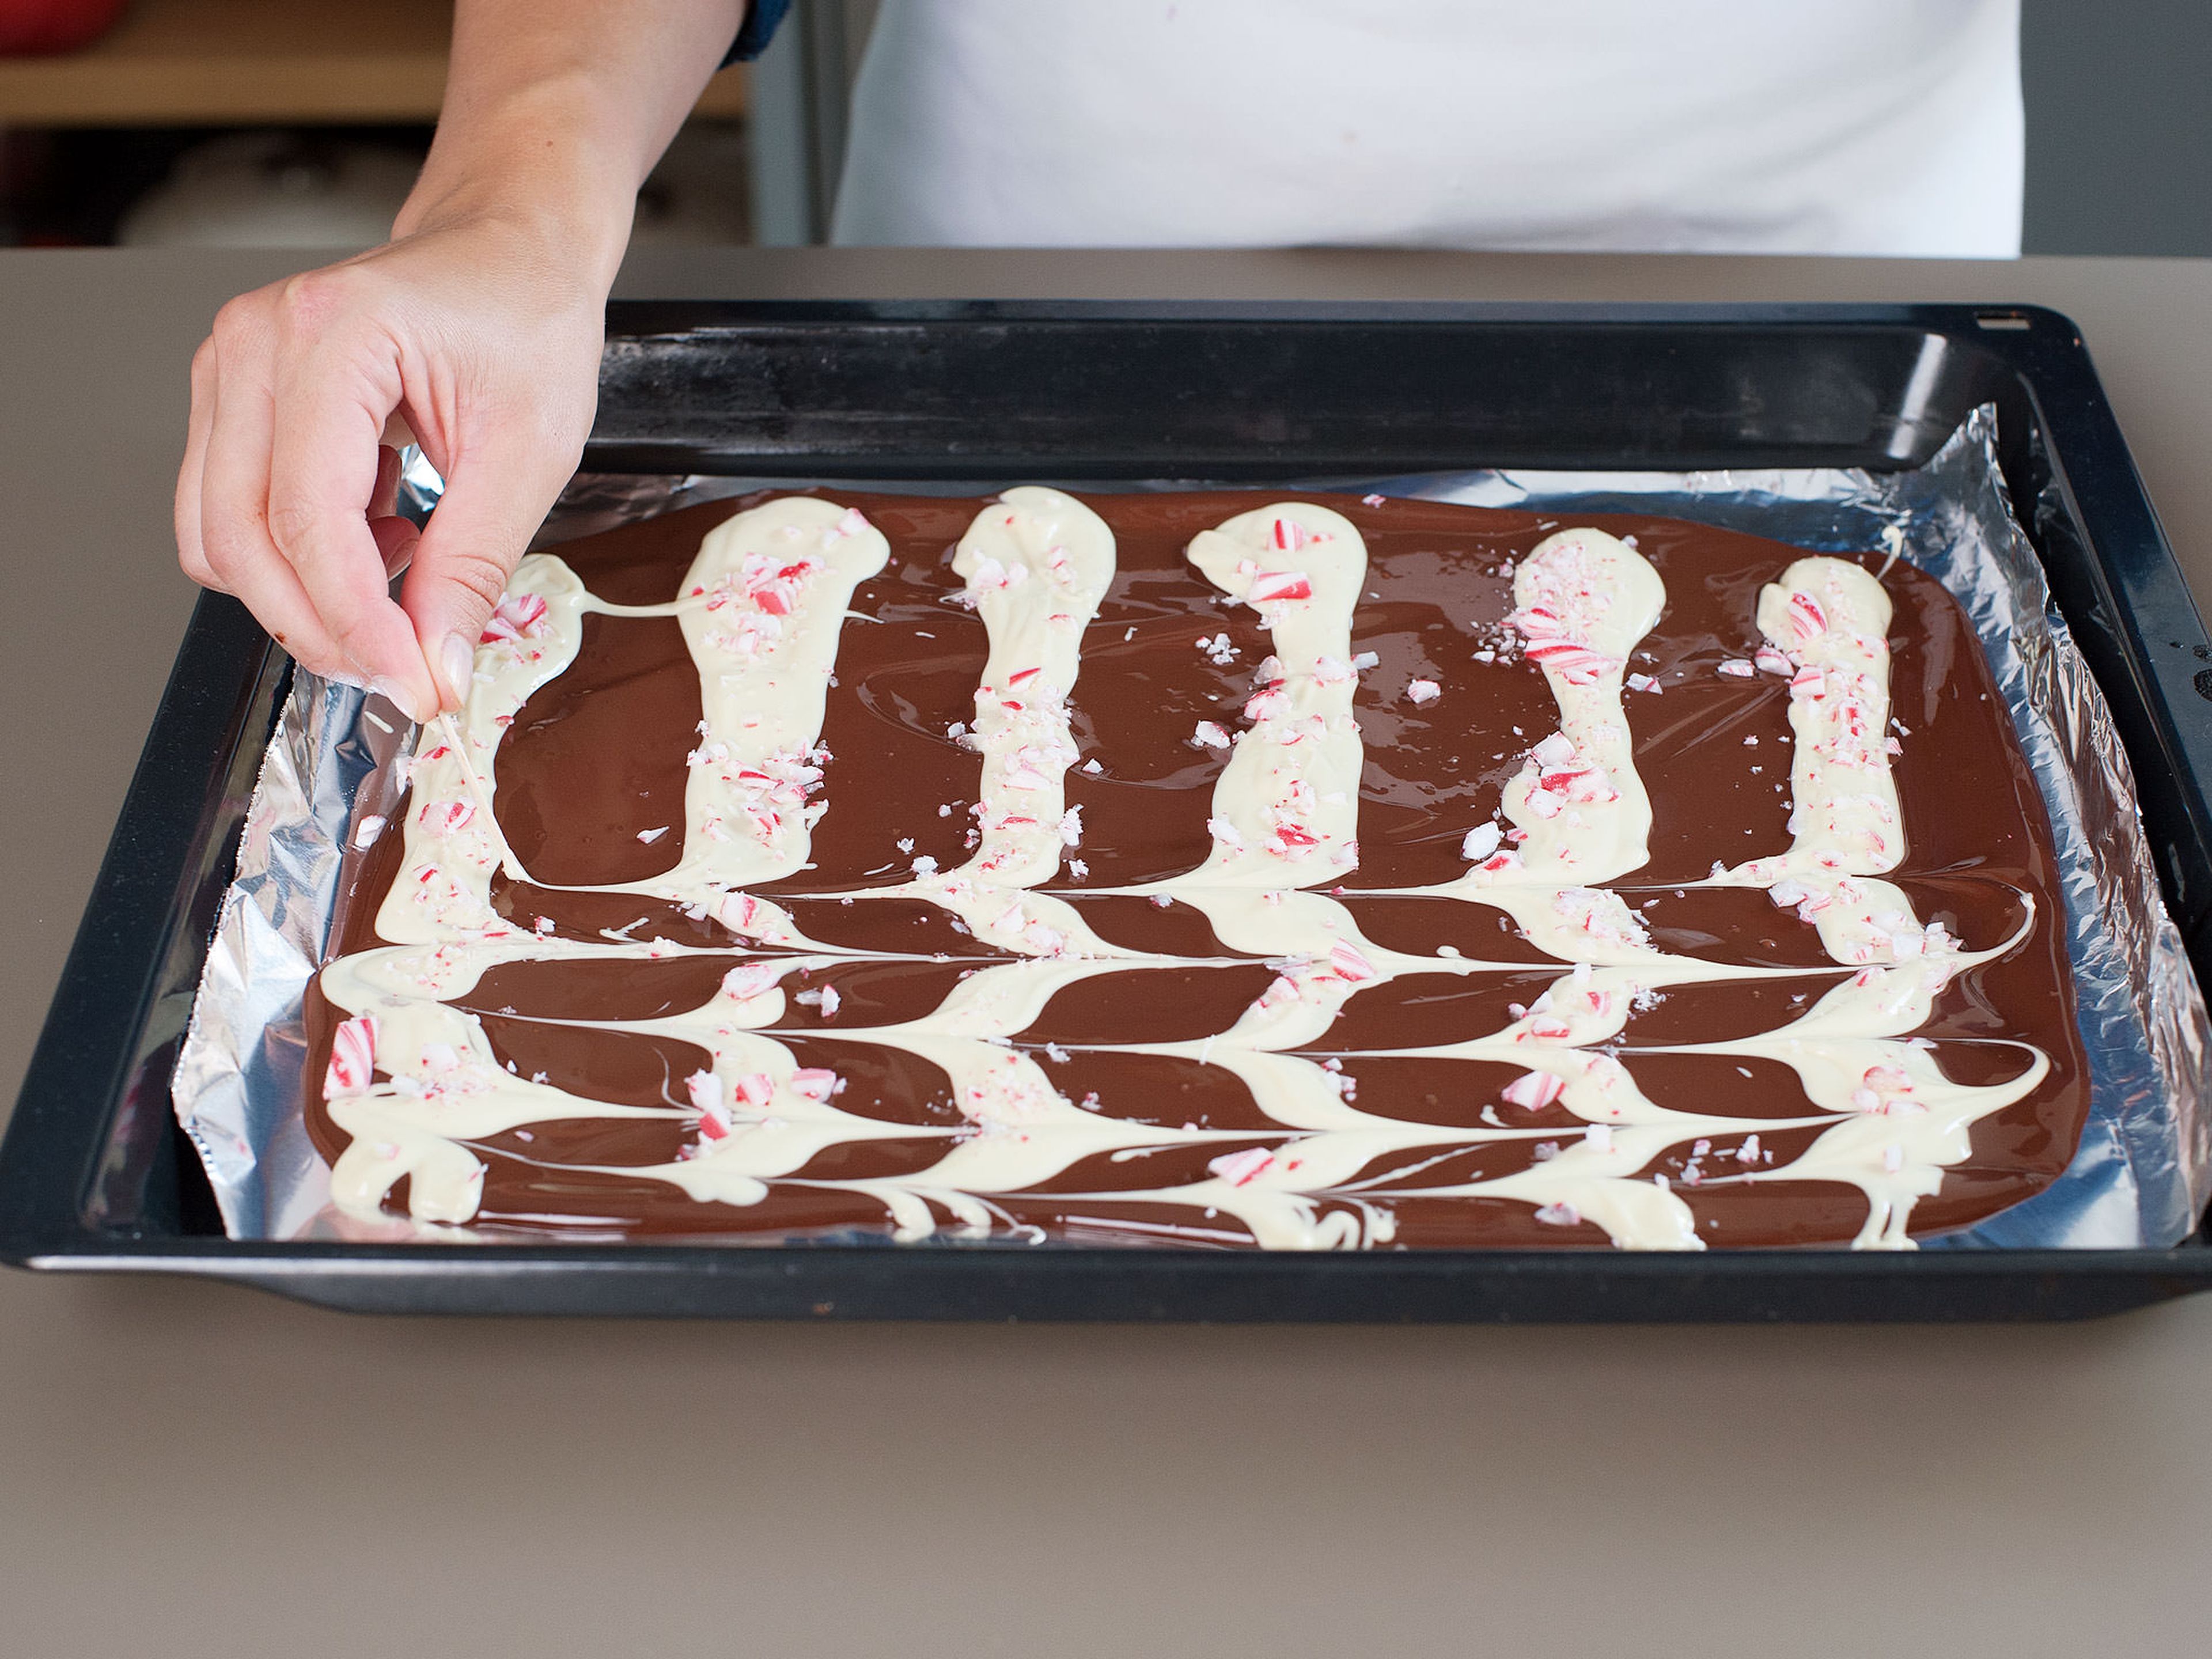 Sprinkle the crushed candy canes over white chocolate stripes. Drag a toothpick perpendicularly through the white chocolate to create the swirl. Place baking sheet on a level surface in refrigerator to harden for approx. 45 min. Cut or break into squares and serve. Store refrigerated in an airtight container.